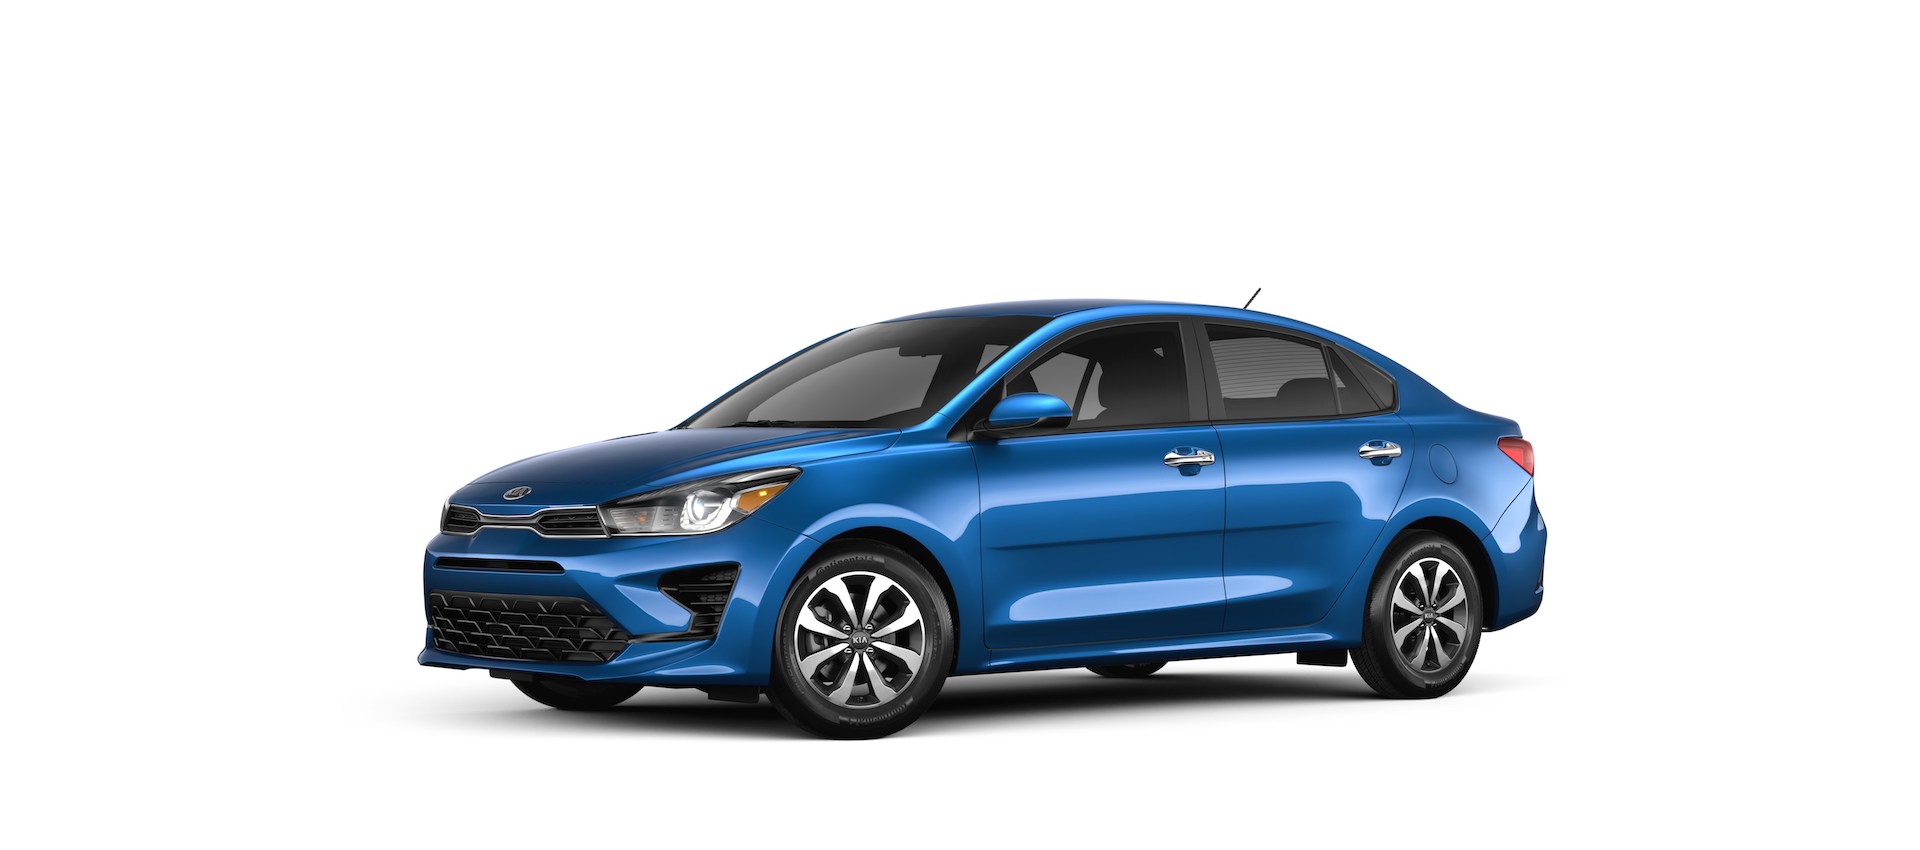 21 Kia Rio Review Ratings Specs Prices And Photos The Car Connection